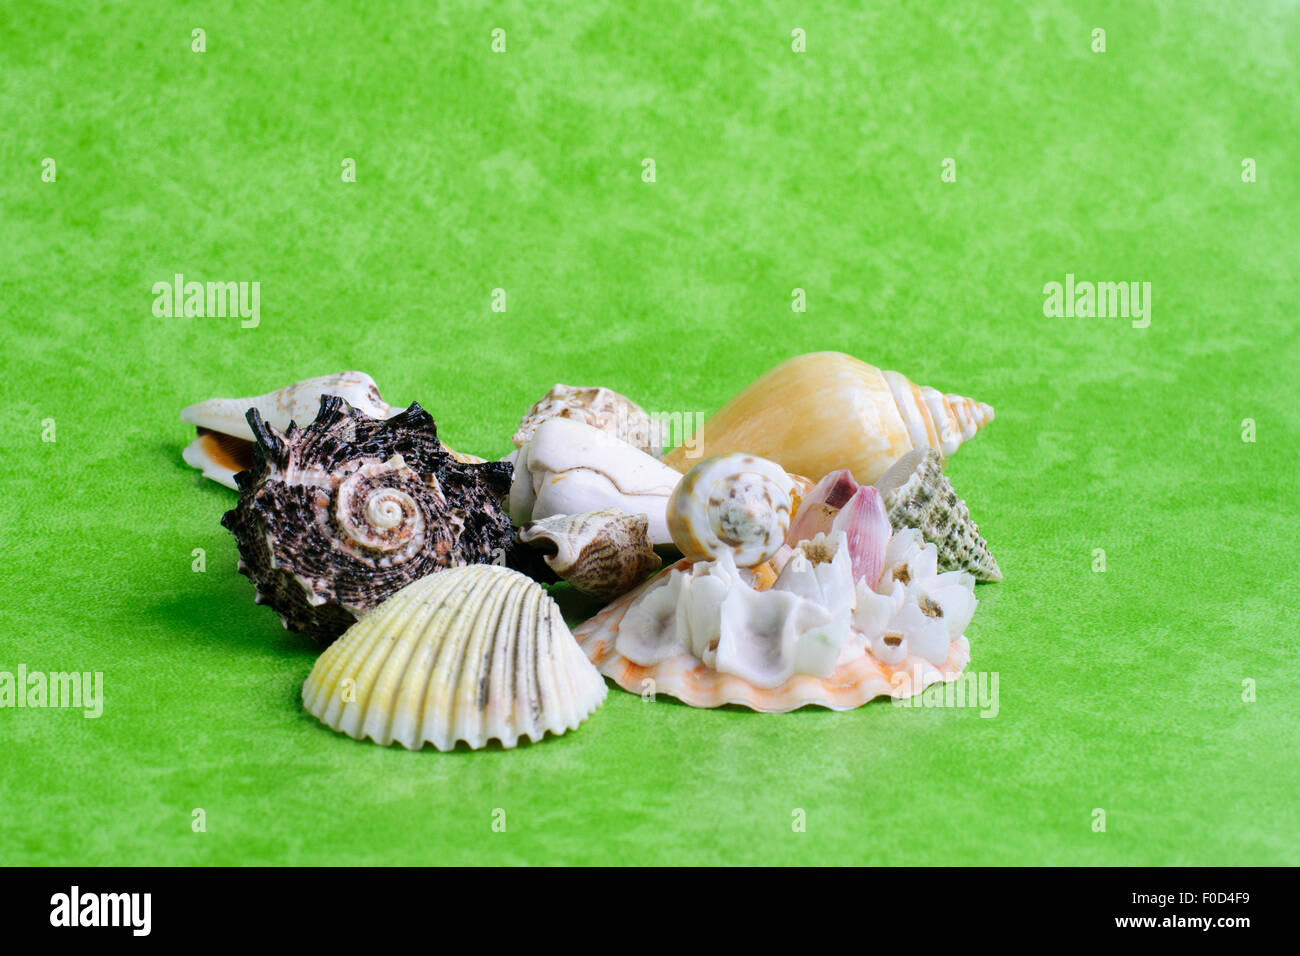 MINERAL, SEA SHELLS, SHELLS BEACH, CLOSE-UP ISOLATED WHITE BACKGROUND Stock Photo